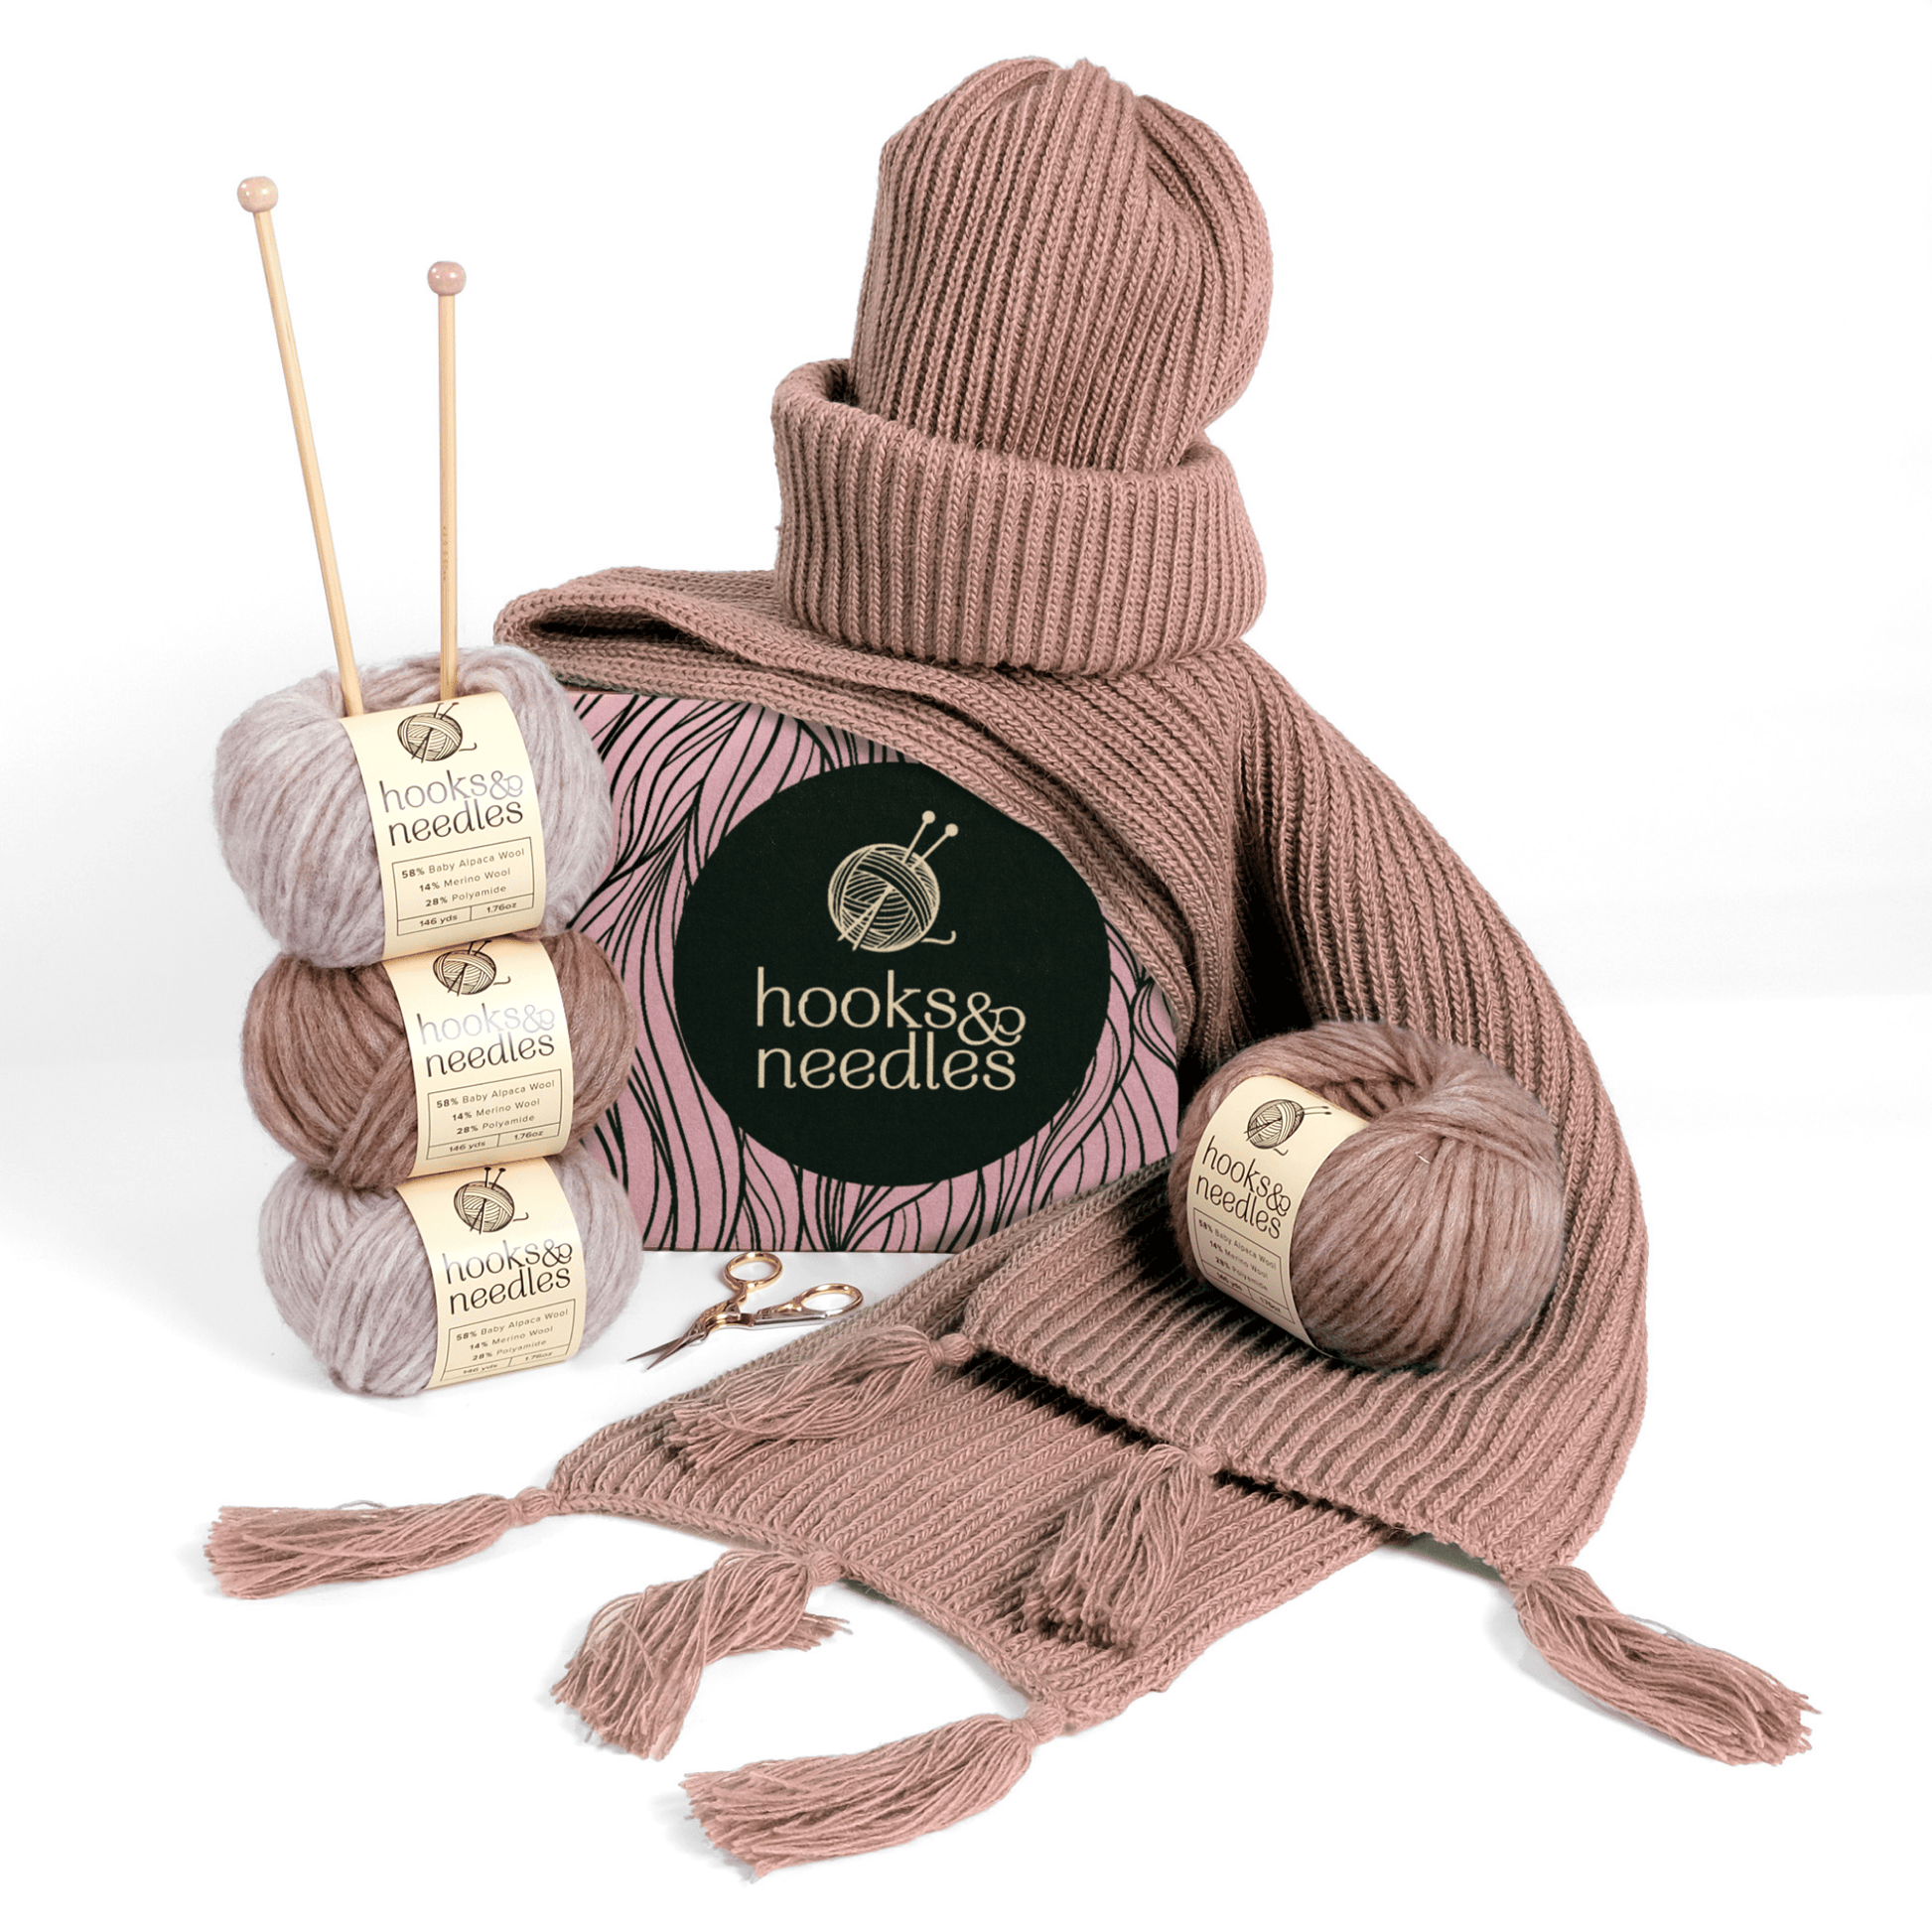 [6-Month-Prepaid] Hooks & Needles Subscription Box #23 with knitting needles, a knitted scarf, and a sweater on a plain background, all in a coordinated dusty pink color.